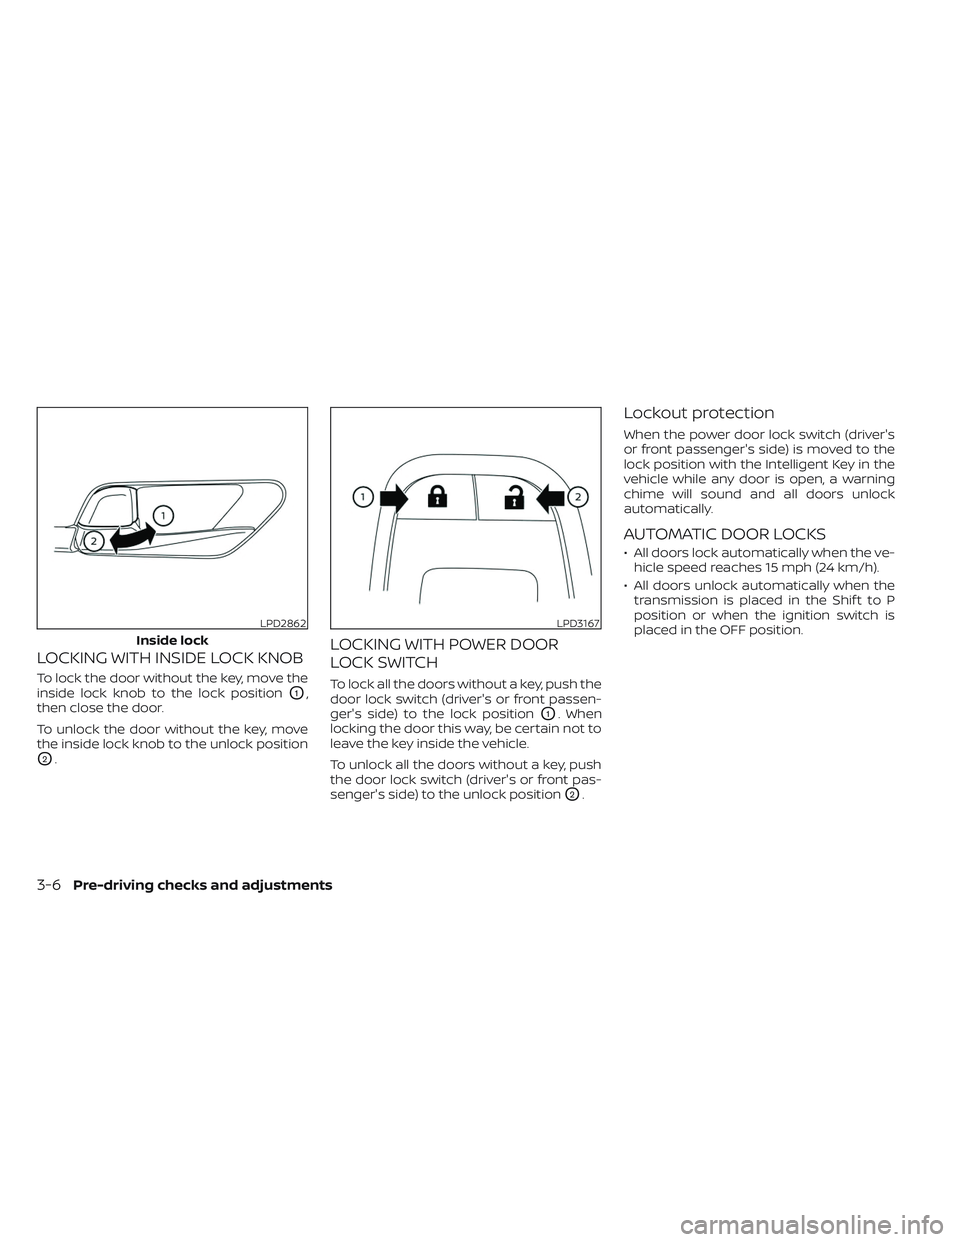 NISSAN PATHFINDER 2022  Owner´s Manual LOCKING WITH INSIDE LOCK KNOB
To lock the door without the key, move the
inside lock knob to the lock position
O1,
then close the door.
To unlock the door without the key, move
the inside lock knob to